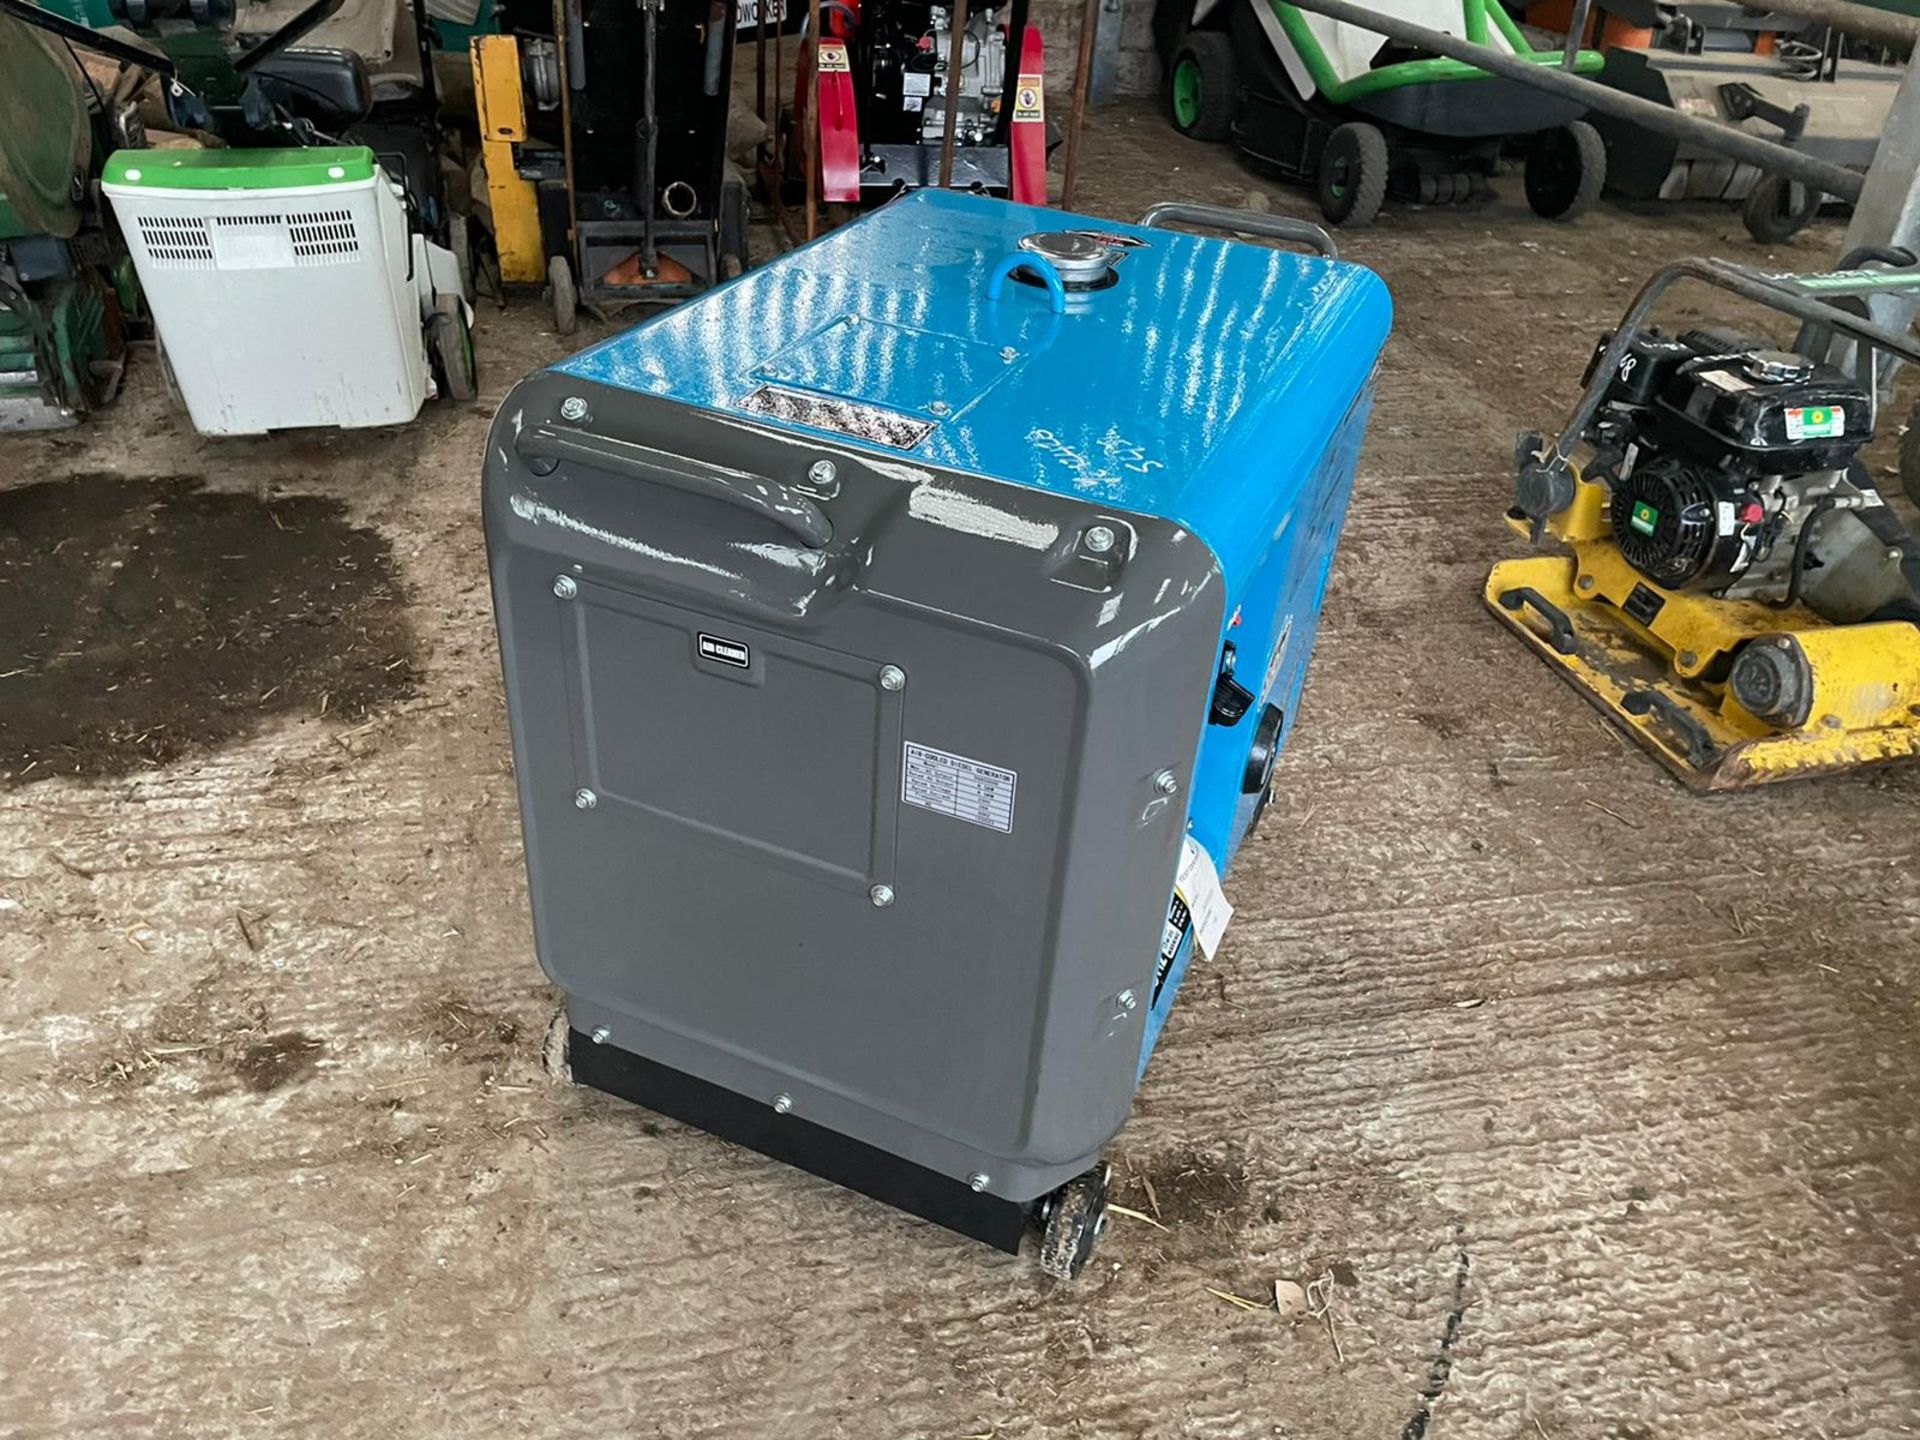 NEW AND UNUSED SILENT 8.5KvA DIESEL GENERATOR, TOOL BAG INCLUDED, 16L FUEL TANK *NO VAT* - Image 2 of 6